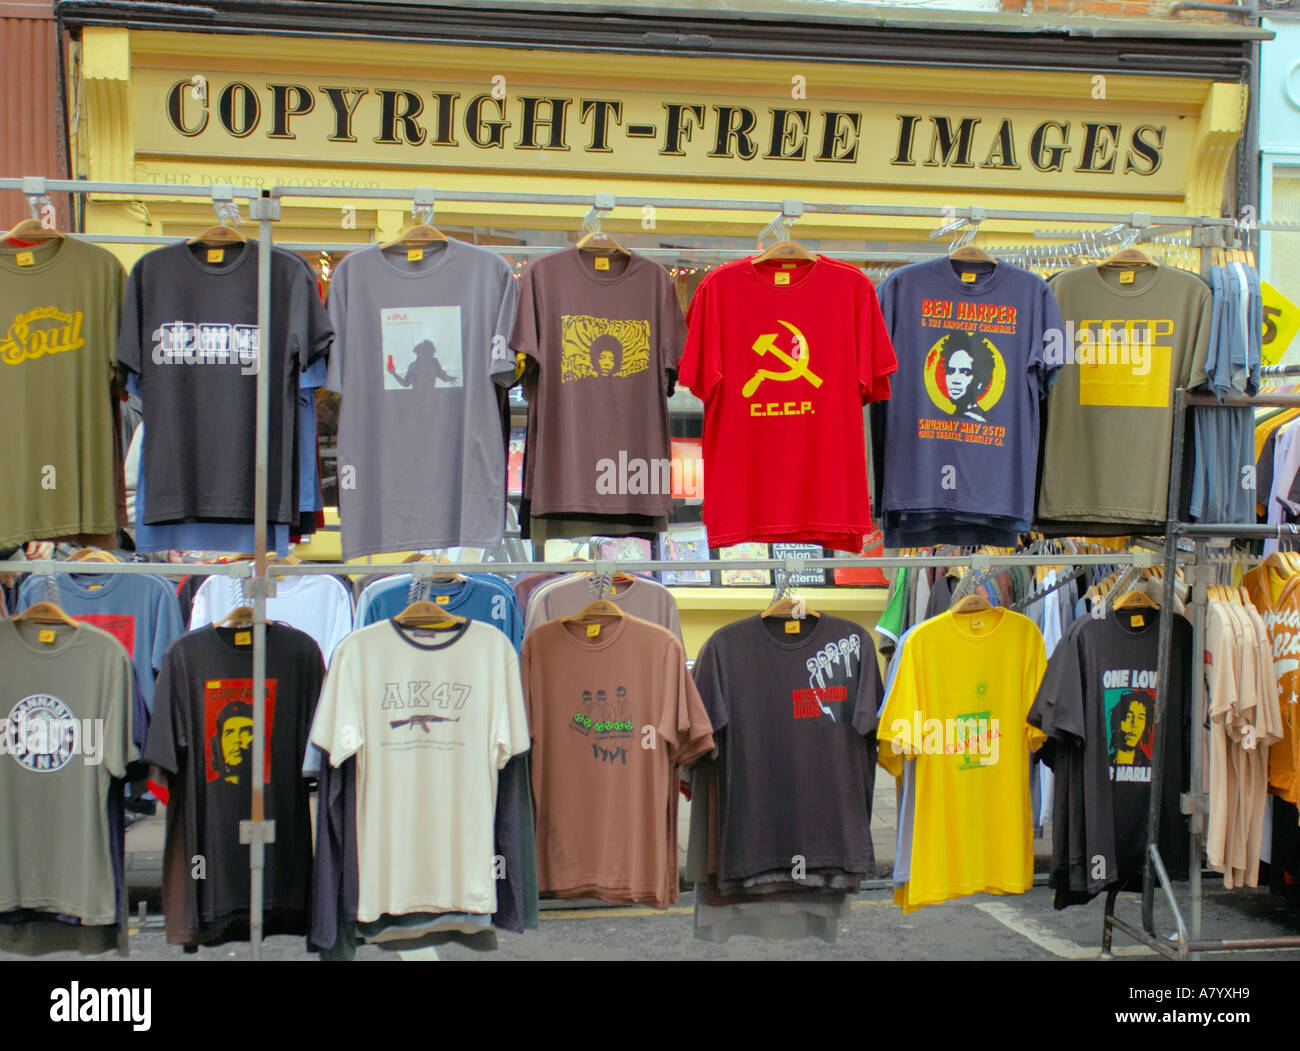 tee shirts at a market stall in Covent Garden London outside a shop with sign copyright free images Stock Photo